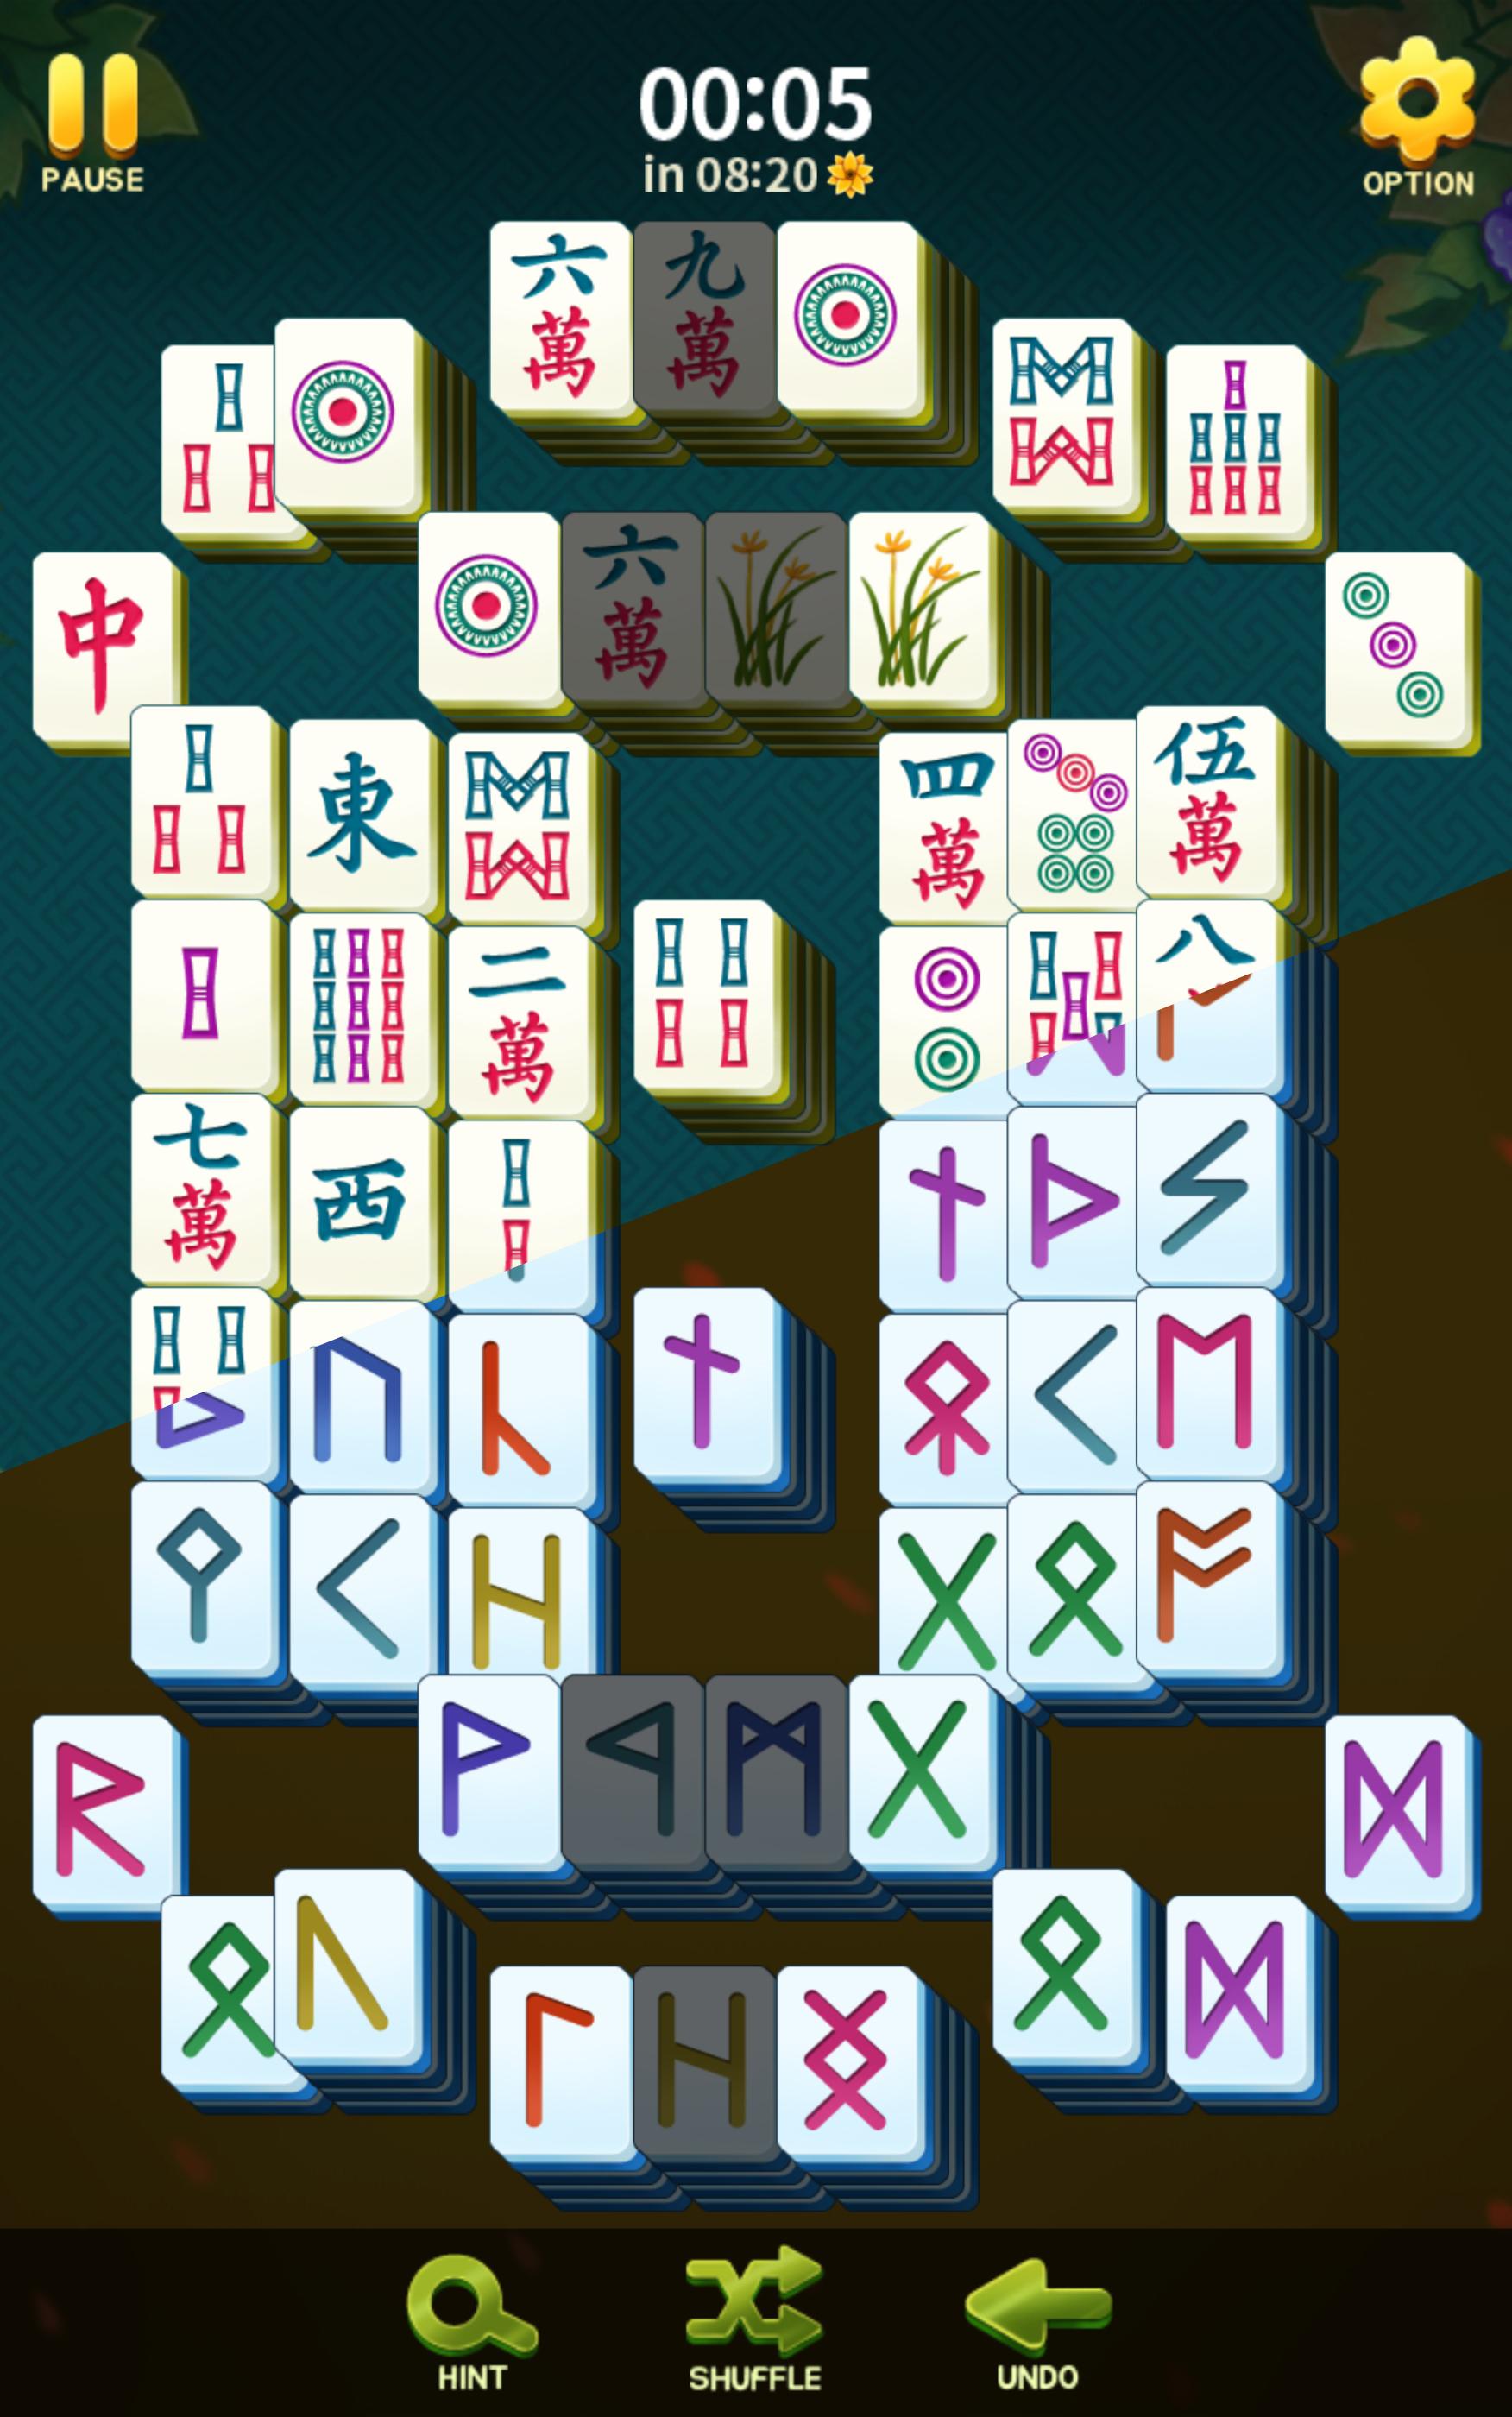 Mahjong Blossom APK for Android Download